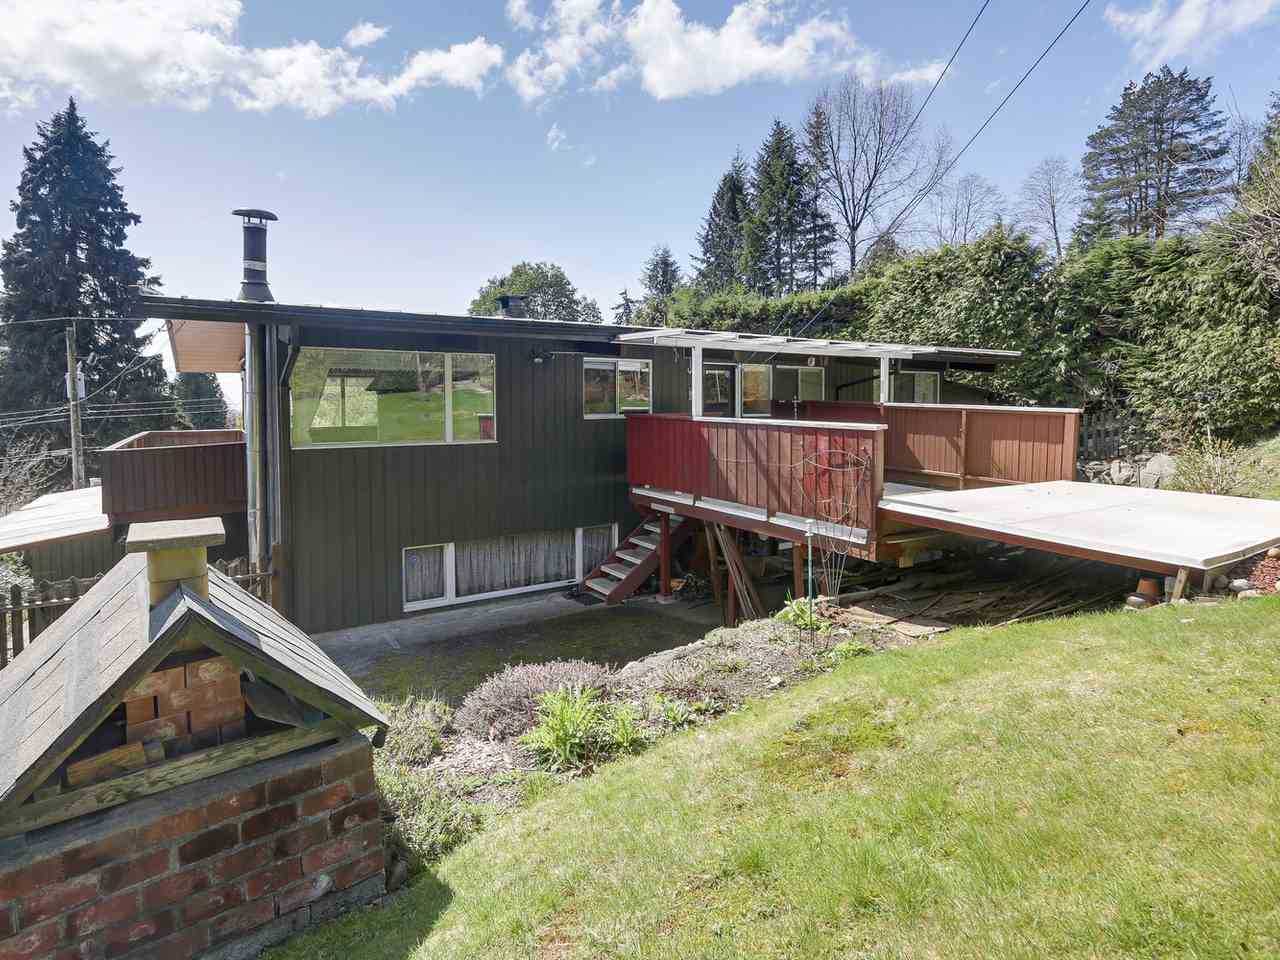 BEFORE - A dated mid-century modern house with rear wood deck.